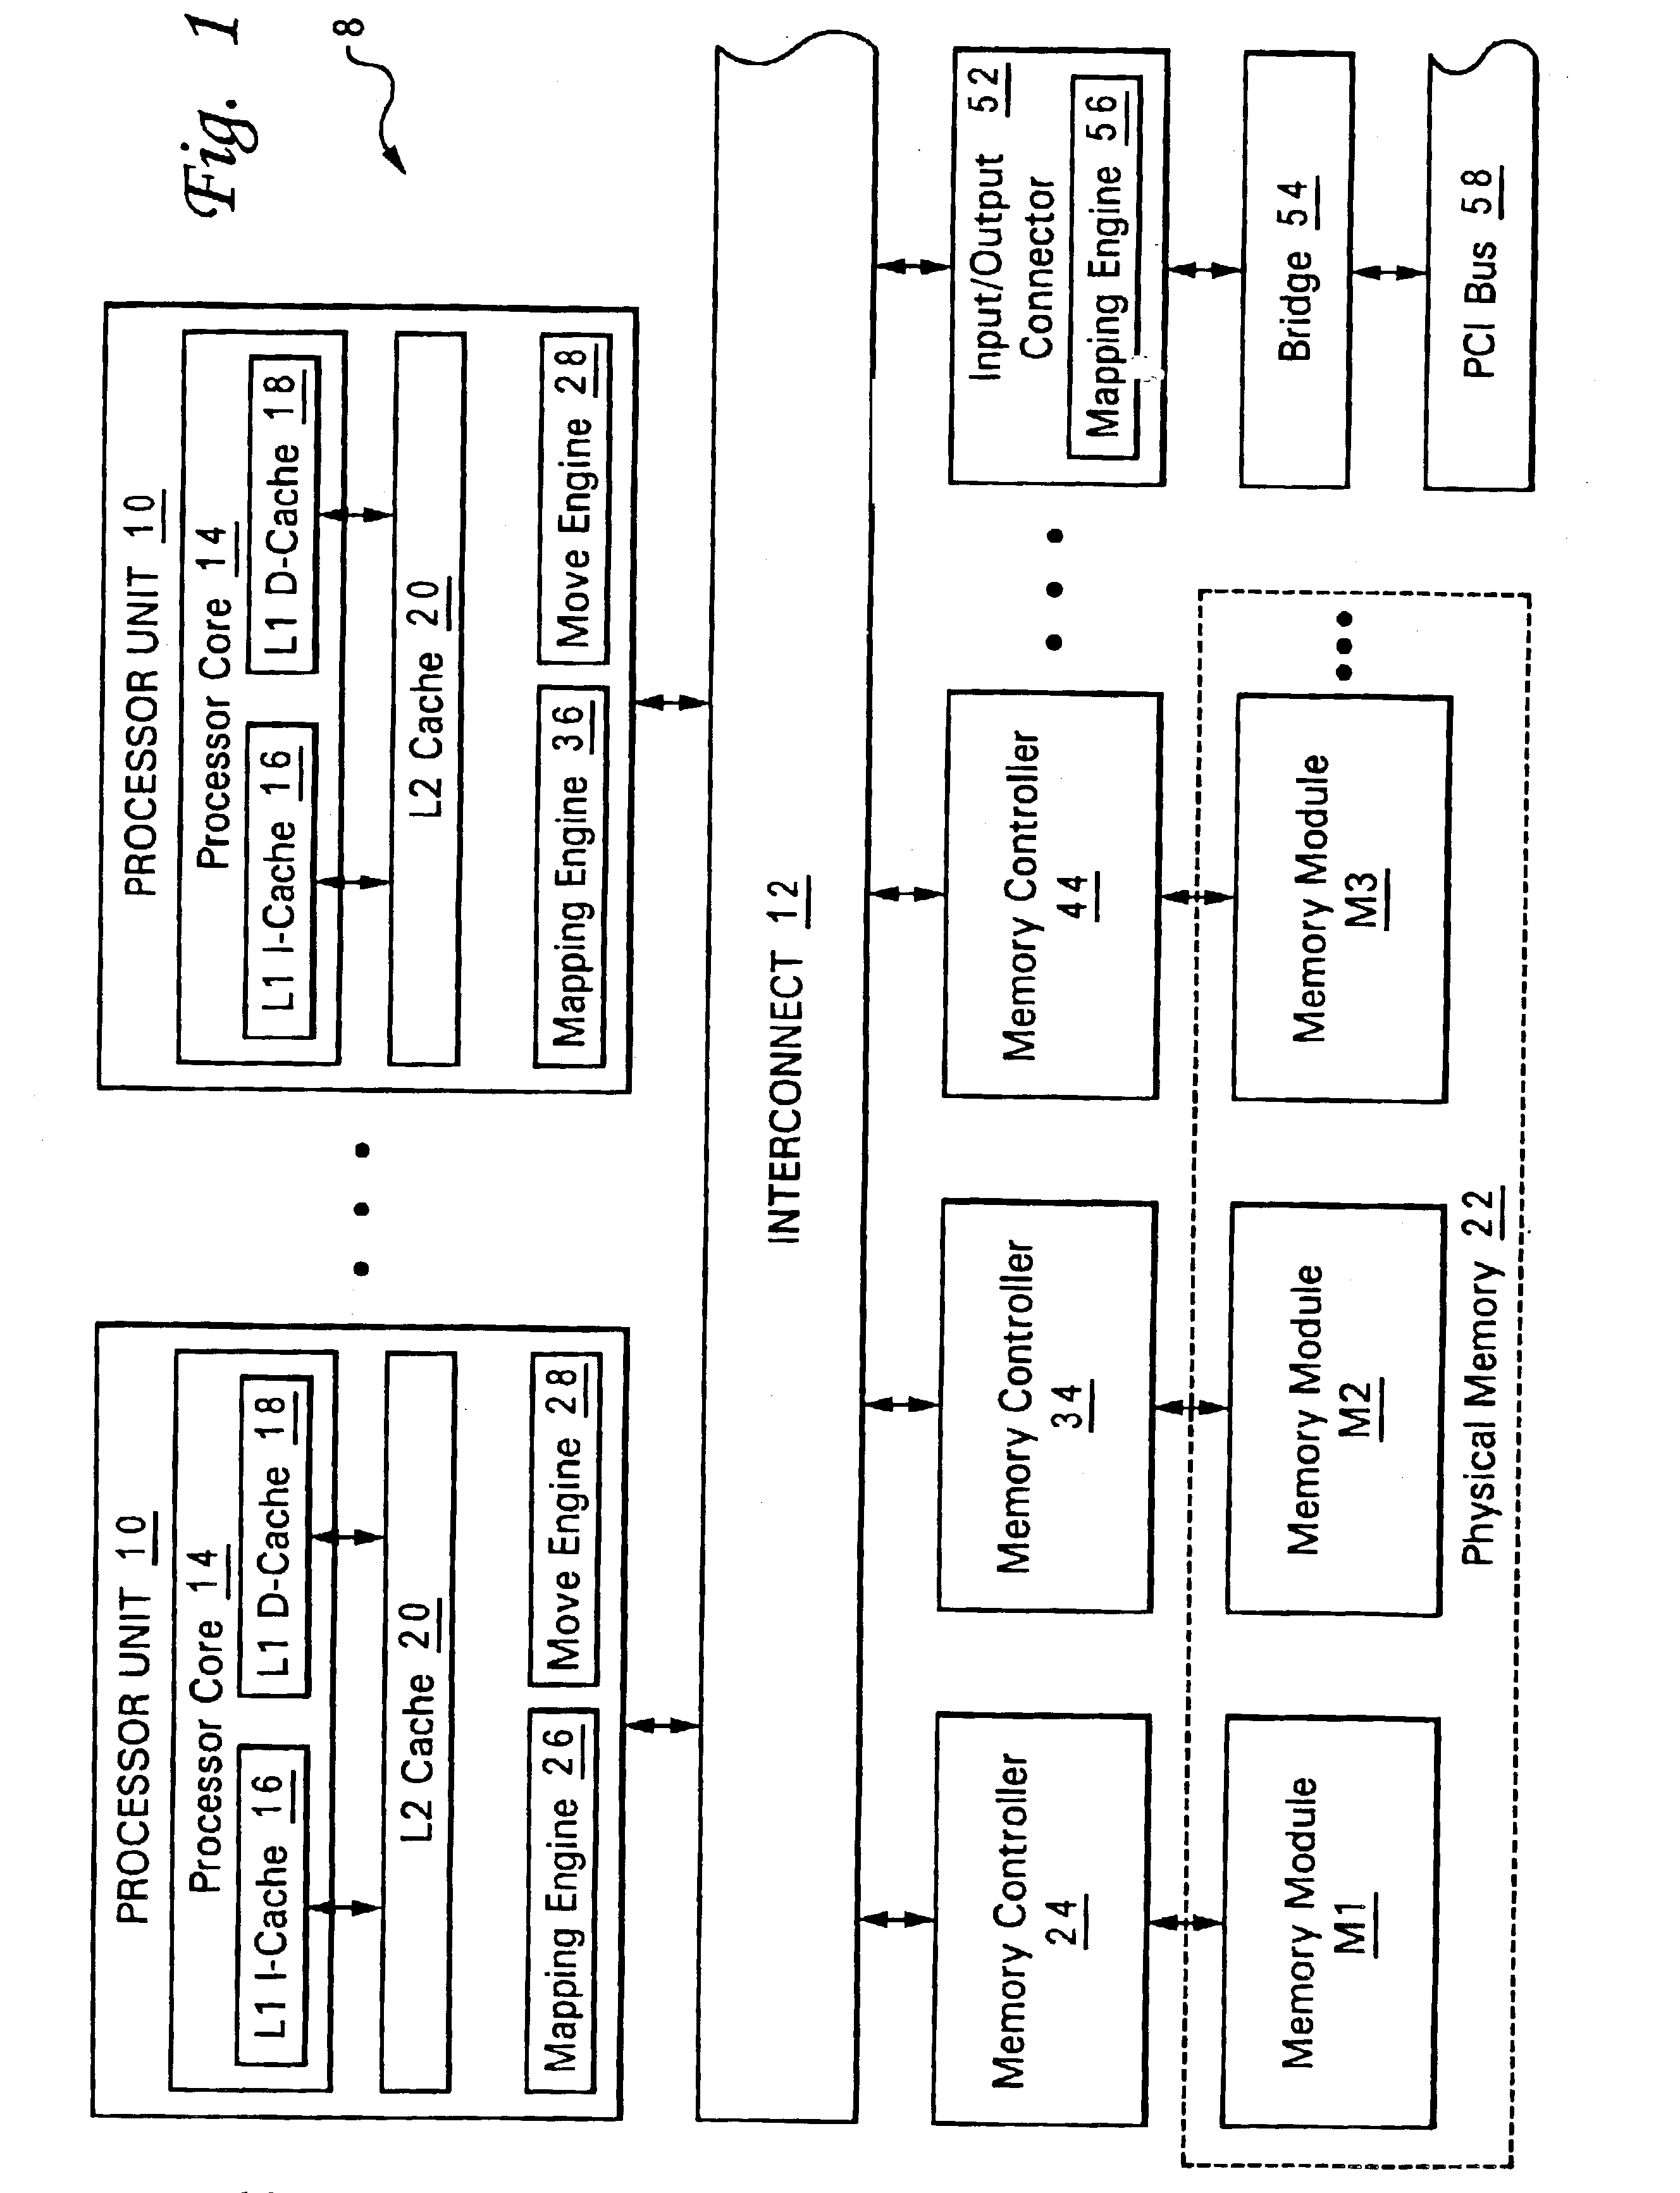 Method and system of managing virtualized physical memory in a multi-processor system